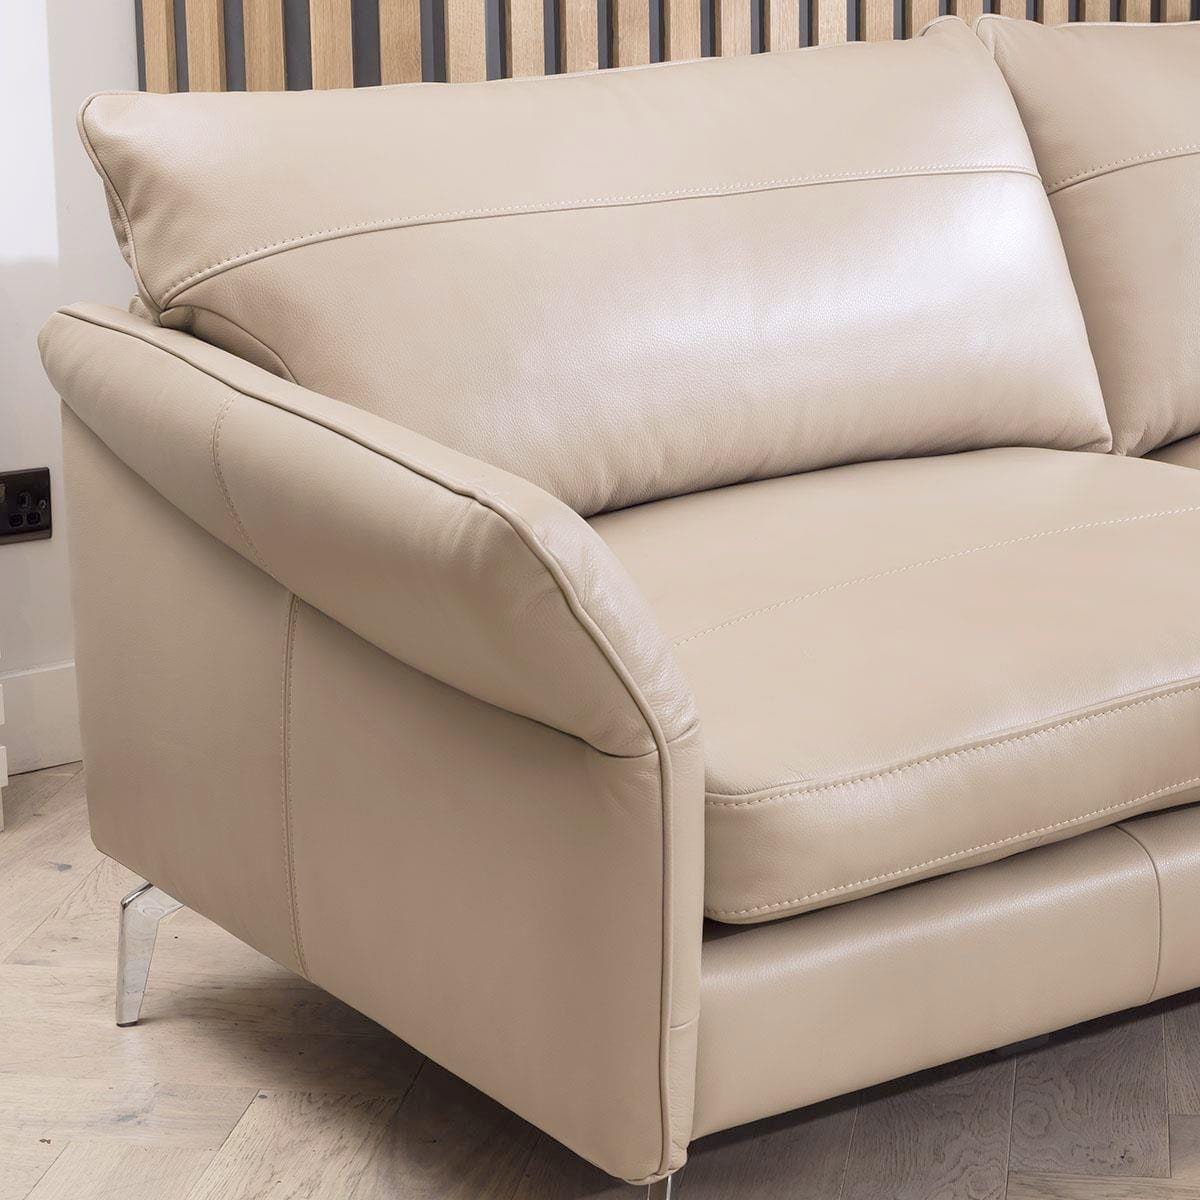 Quatropi 2 Seater Modern Luxury Sofa - Real Leather Options - 165cm In Stock